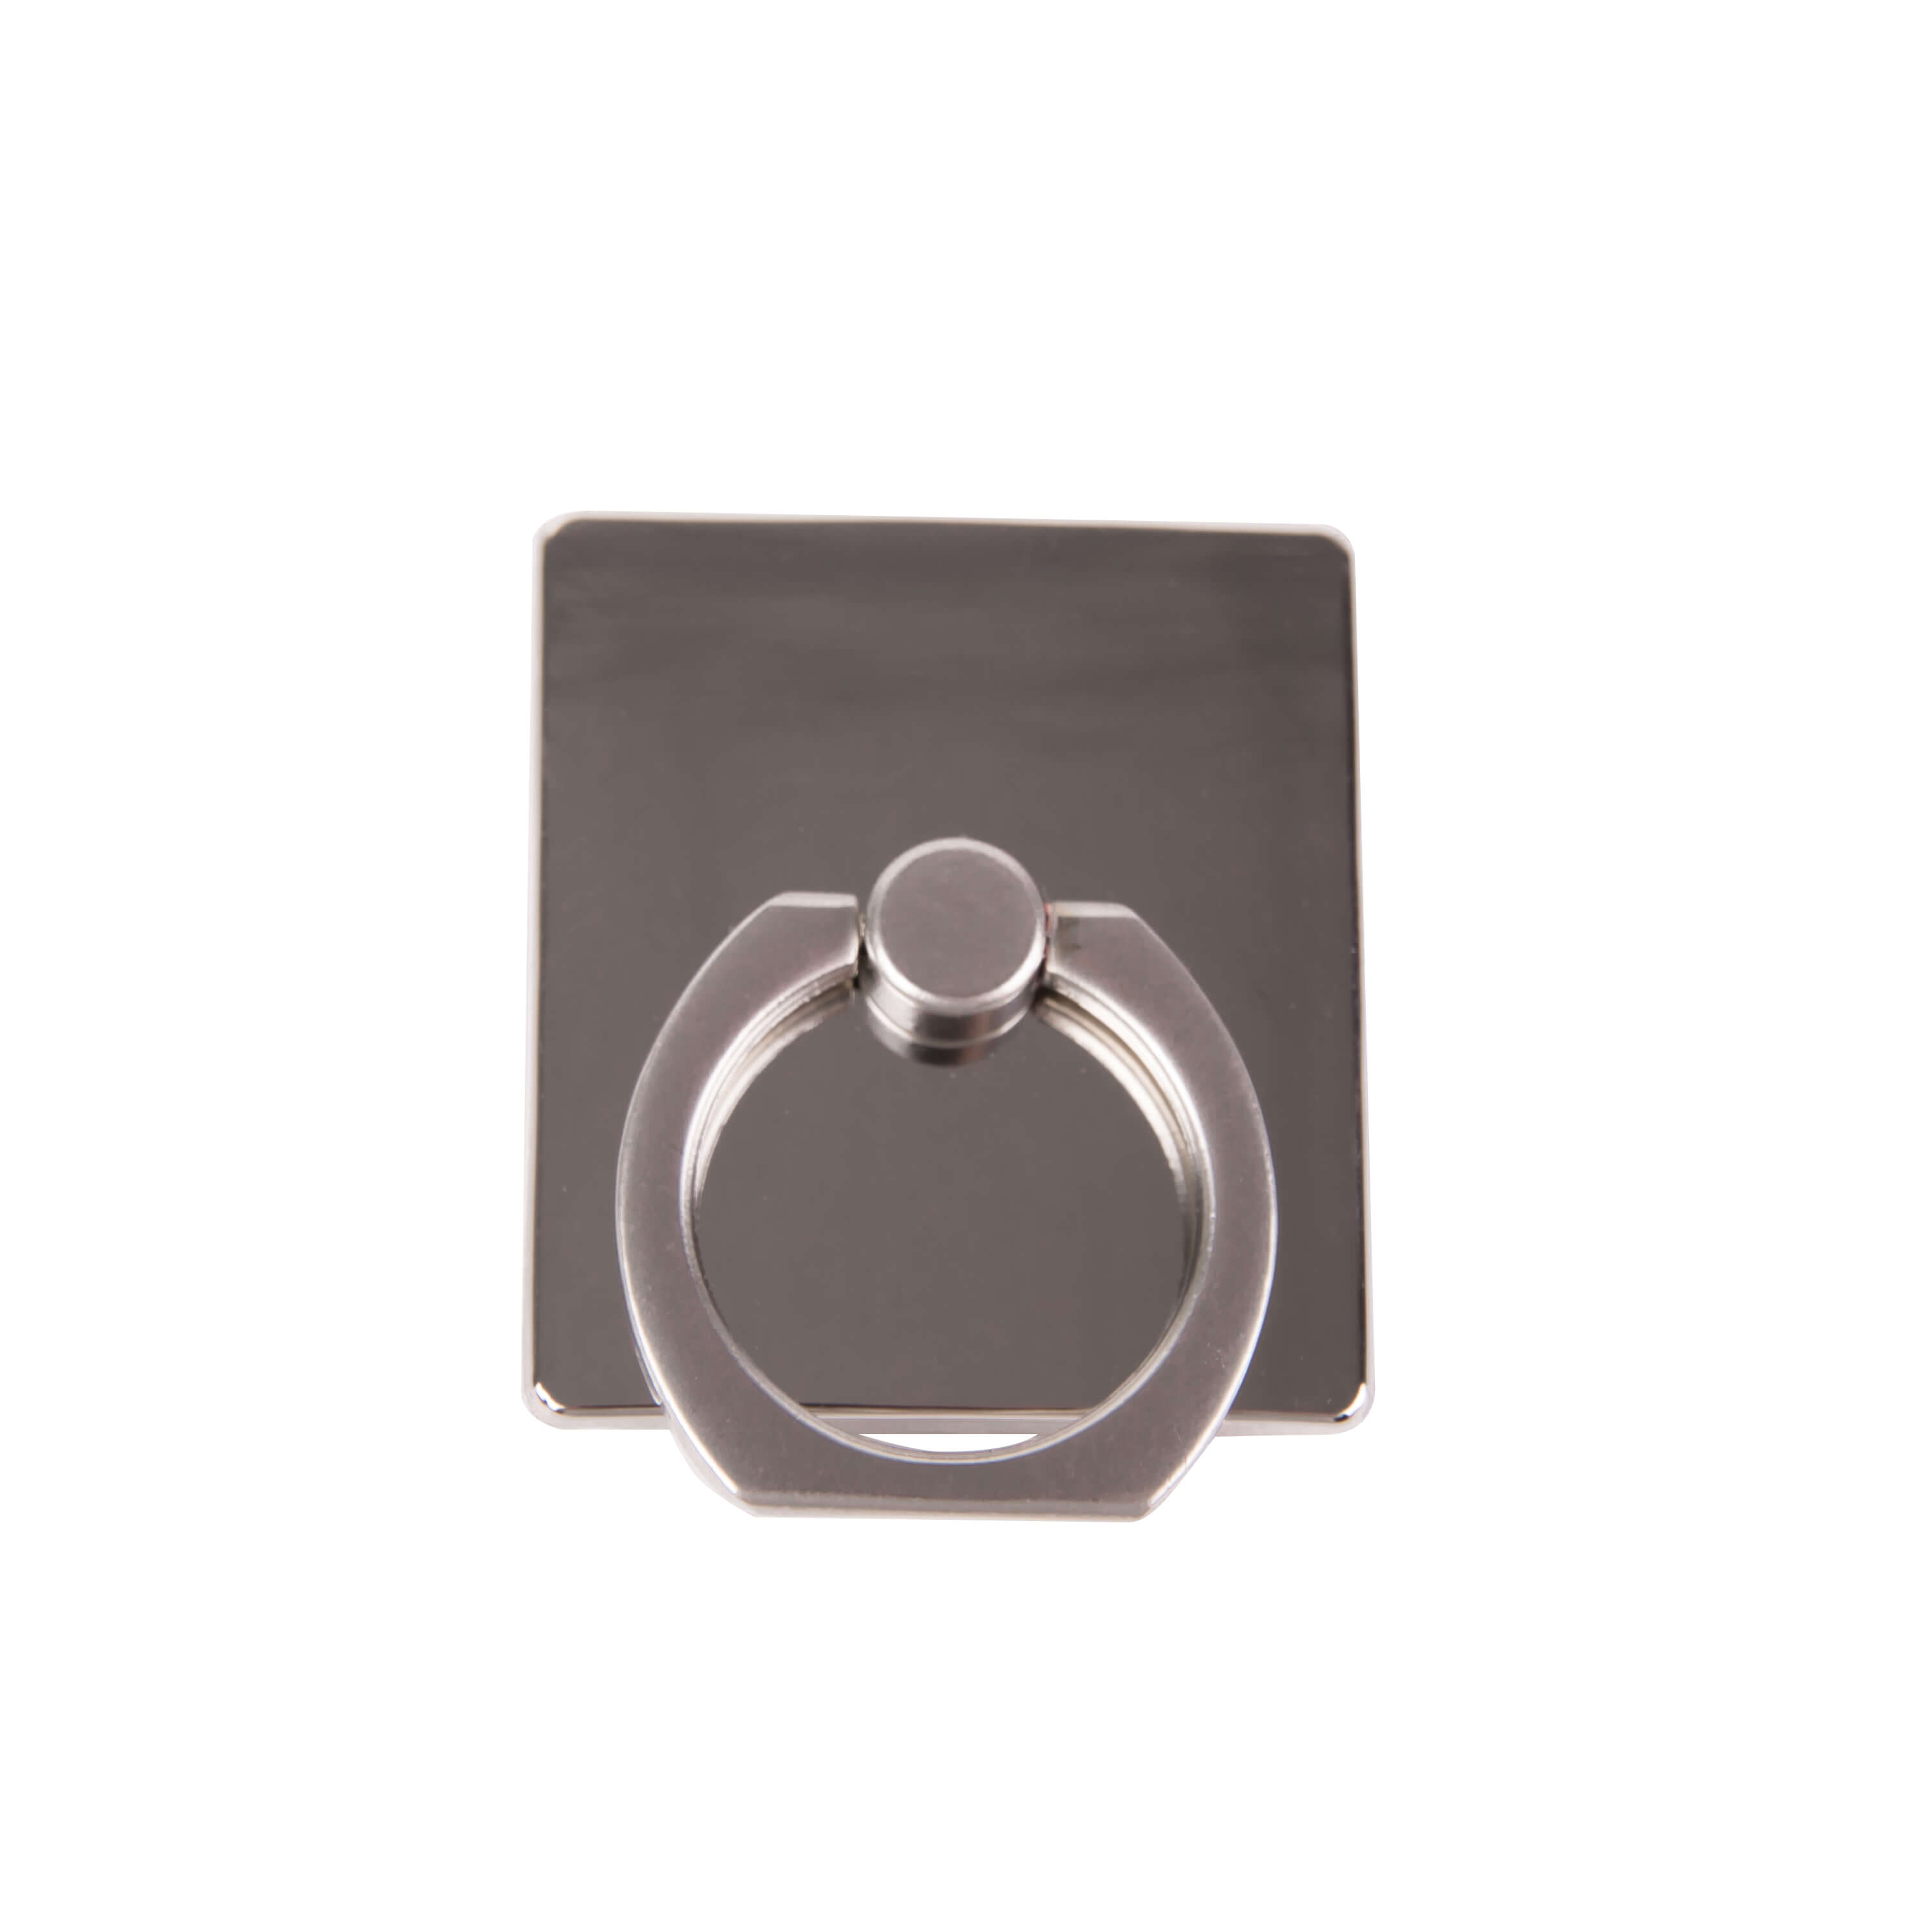 Finger ring silver square with stand function